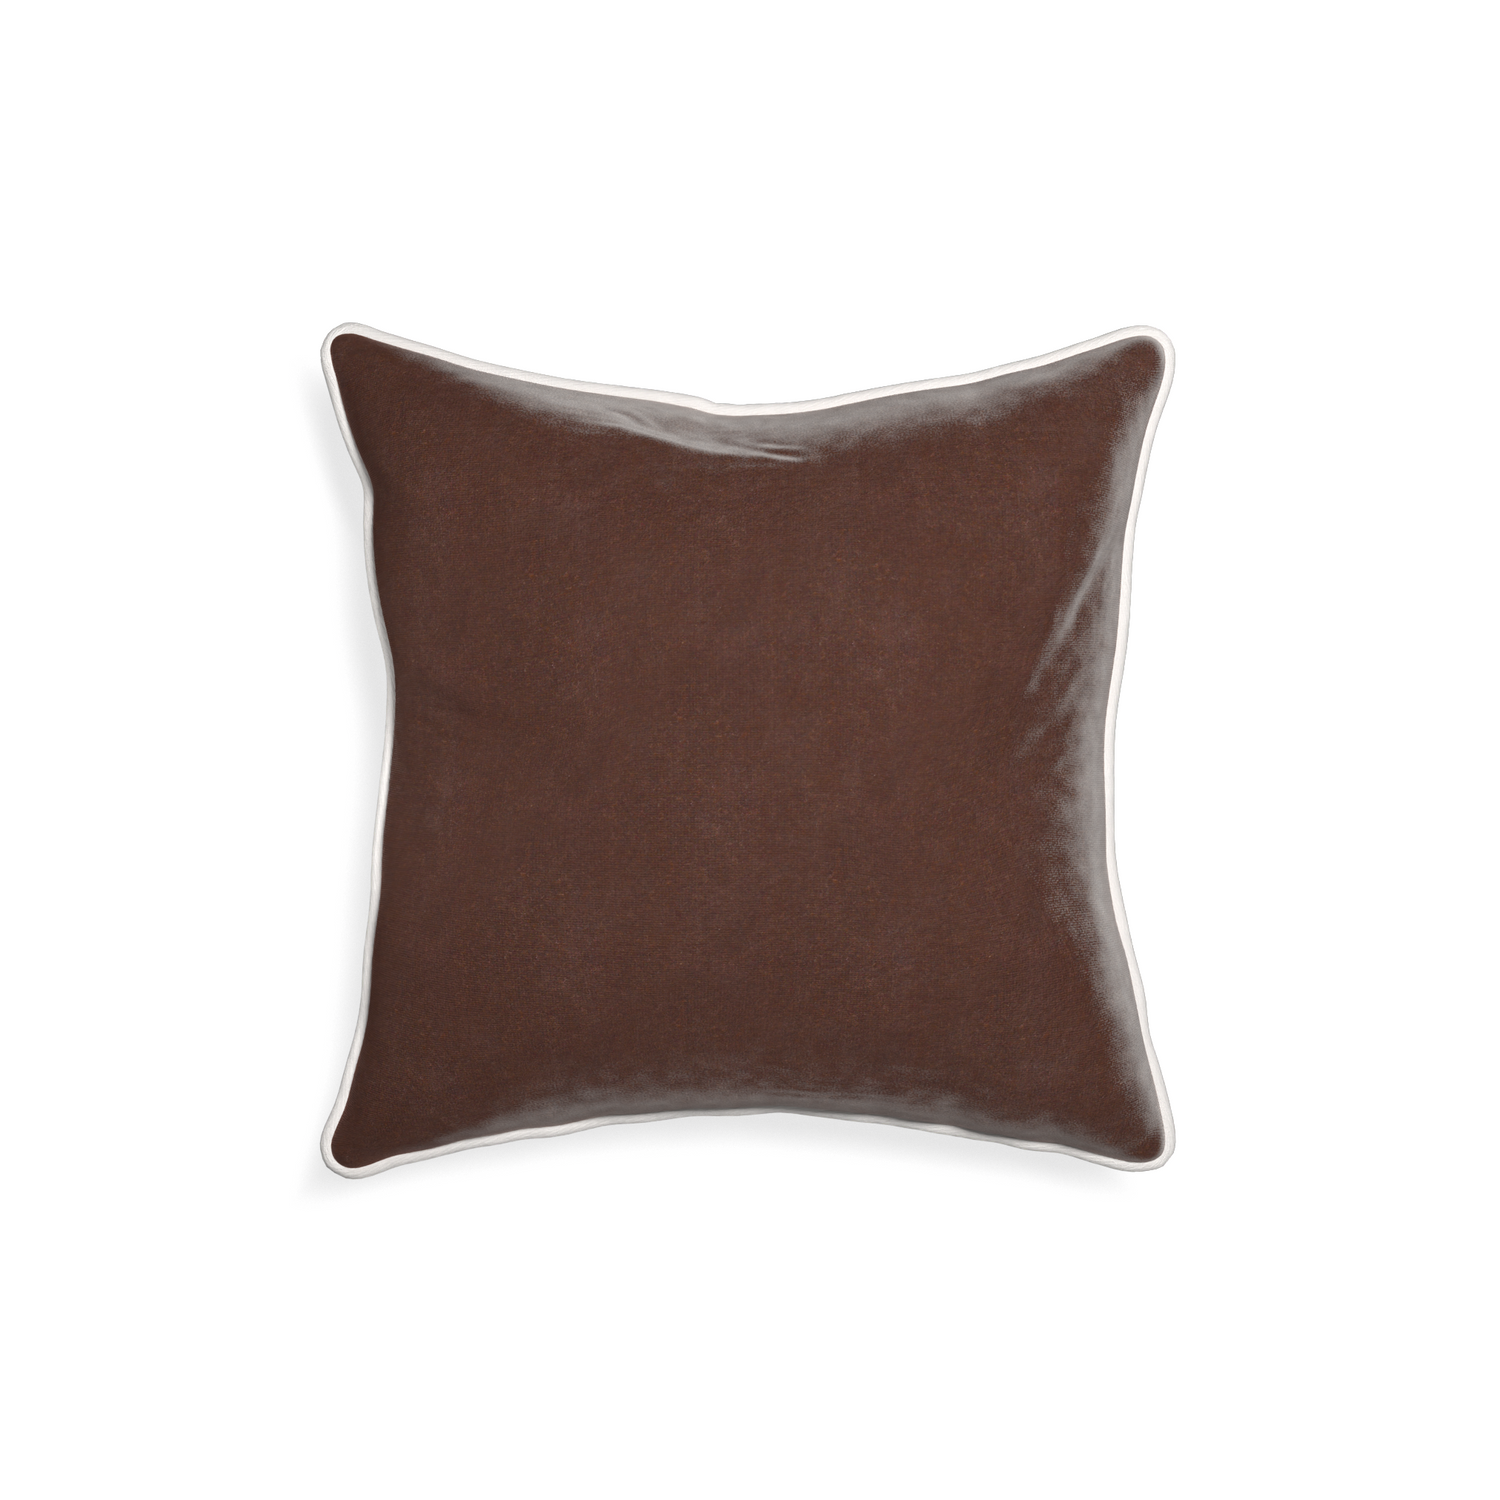 square brown velvet pillow with white piping 